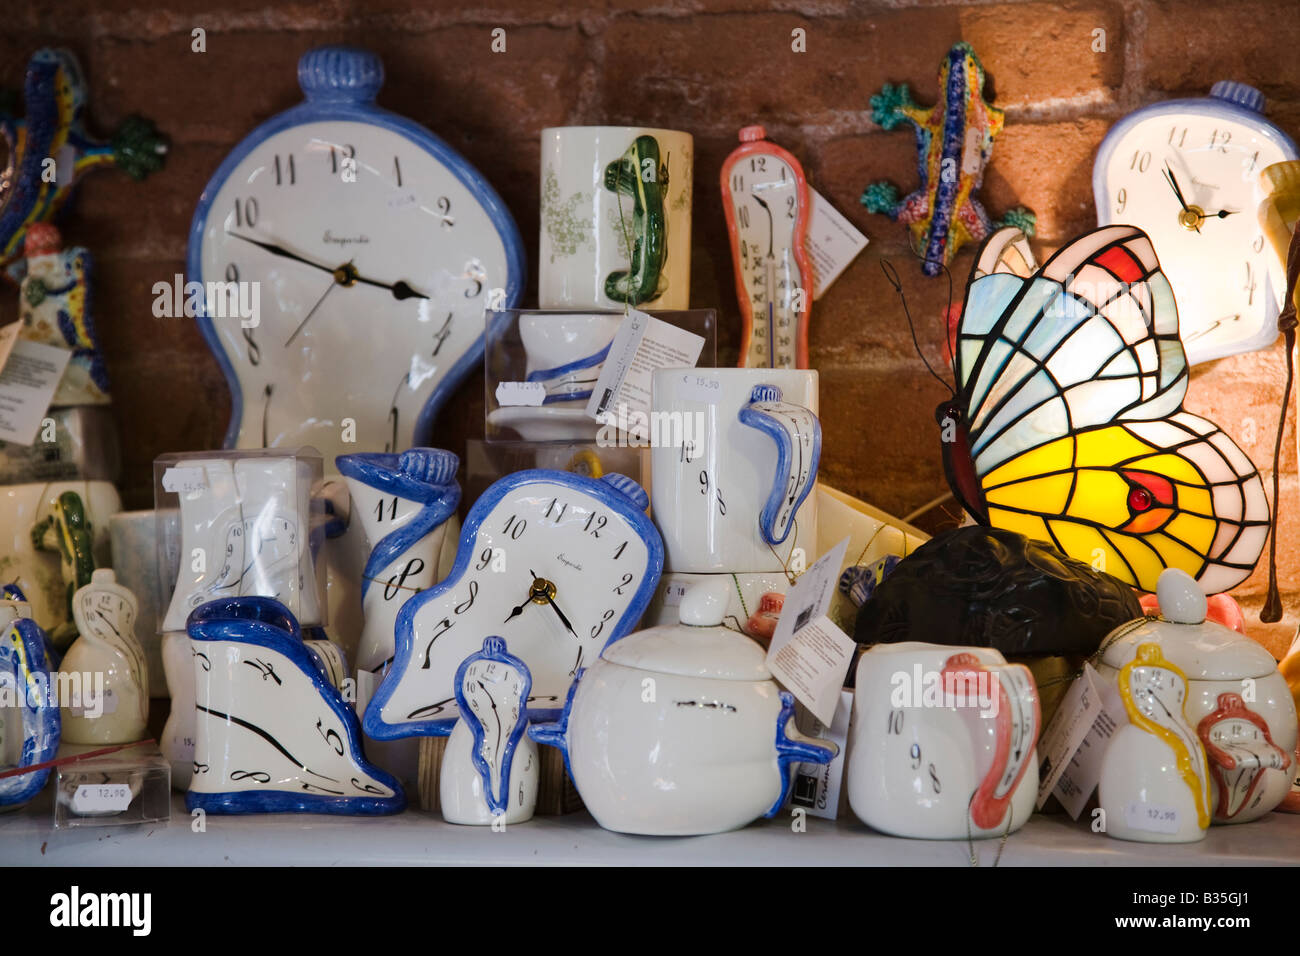 SPAIN Barcelona Gift shop items of Salvador Dali melting clock ceramic and  stained glass cups and decorative items Stock Photo - Alamy